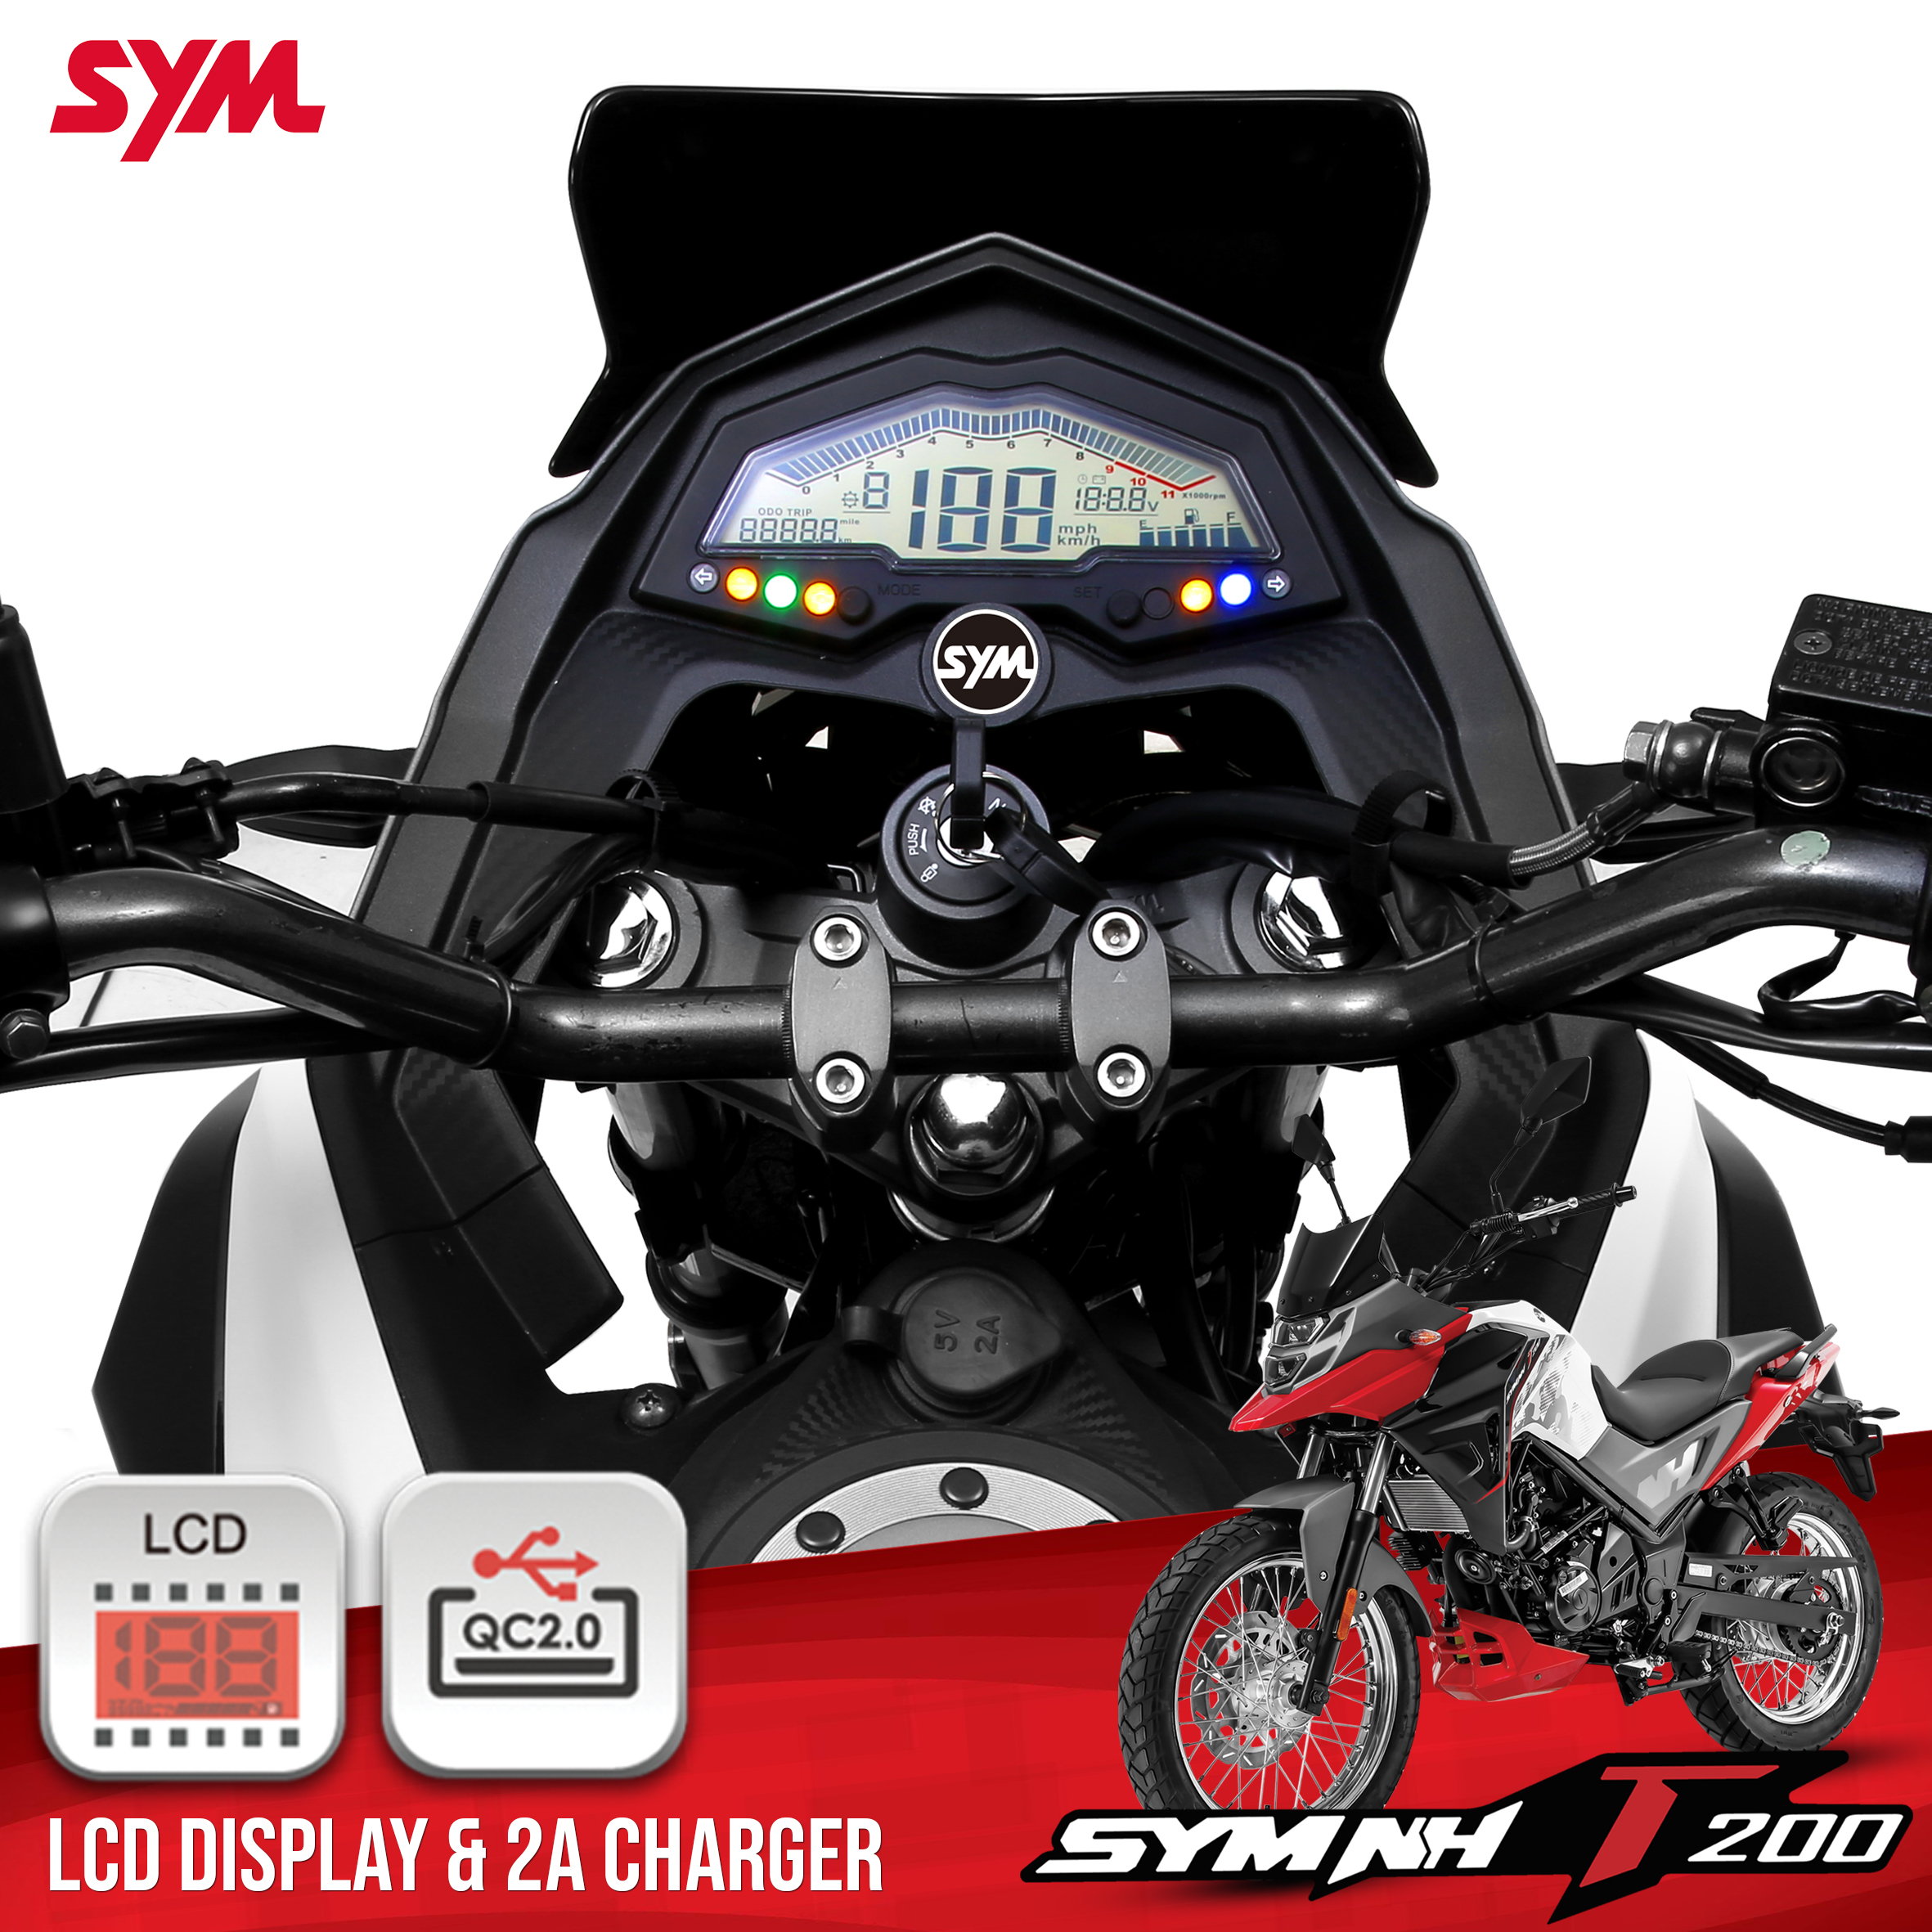 SYM NH T200 Features